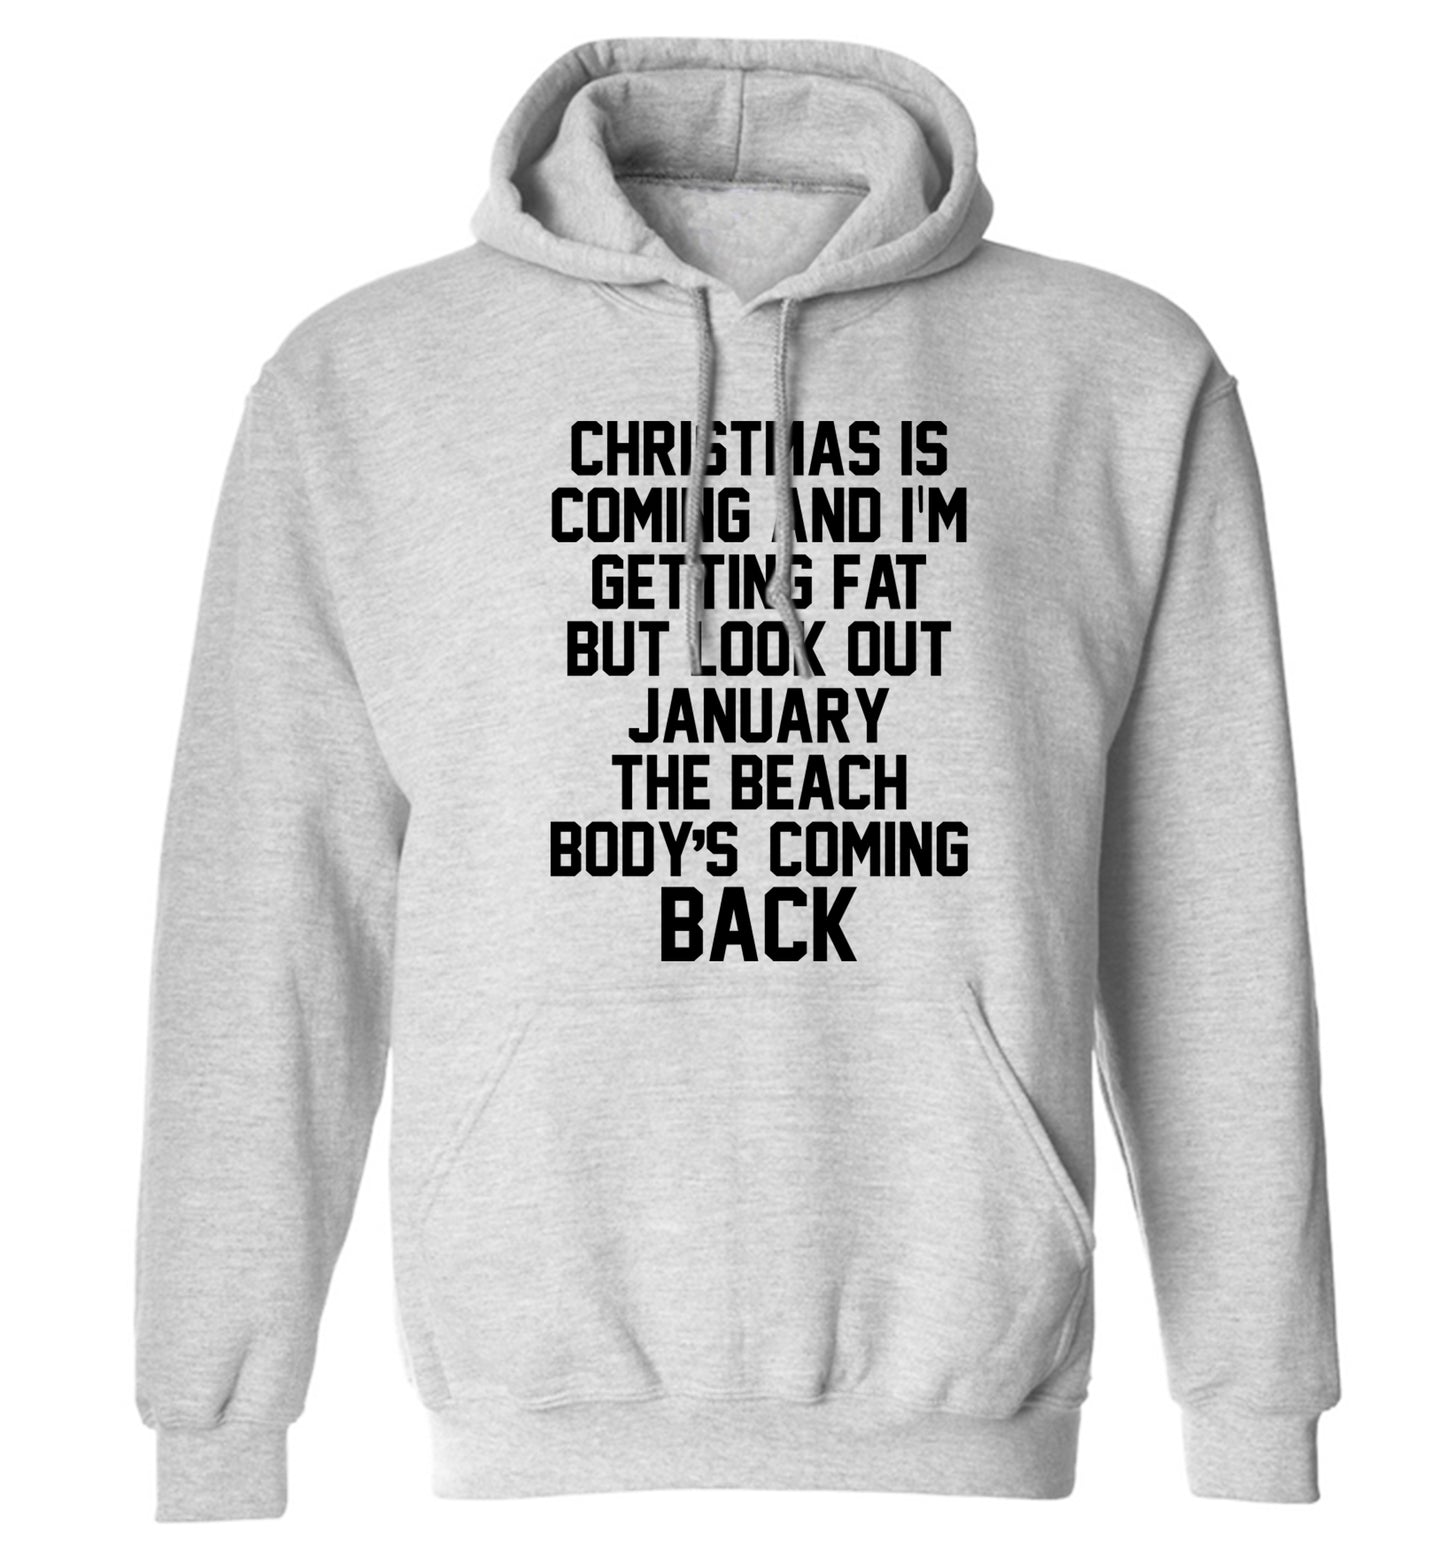 Christmas is coming and I'm getting fat but look out January the beach body's coming back! adults unisex grey hoodie 2XL